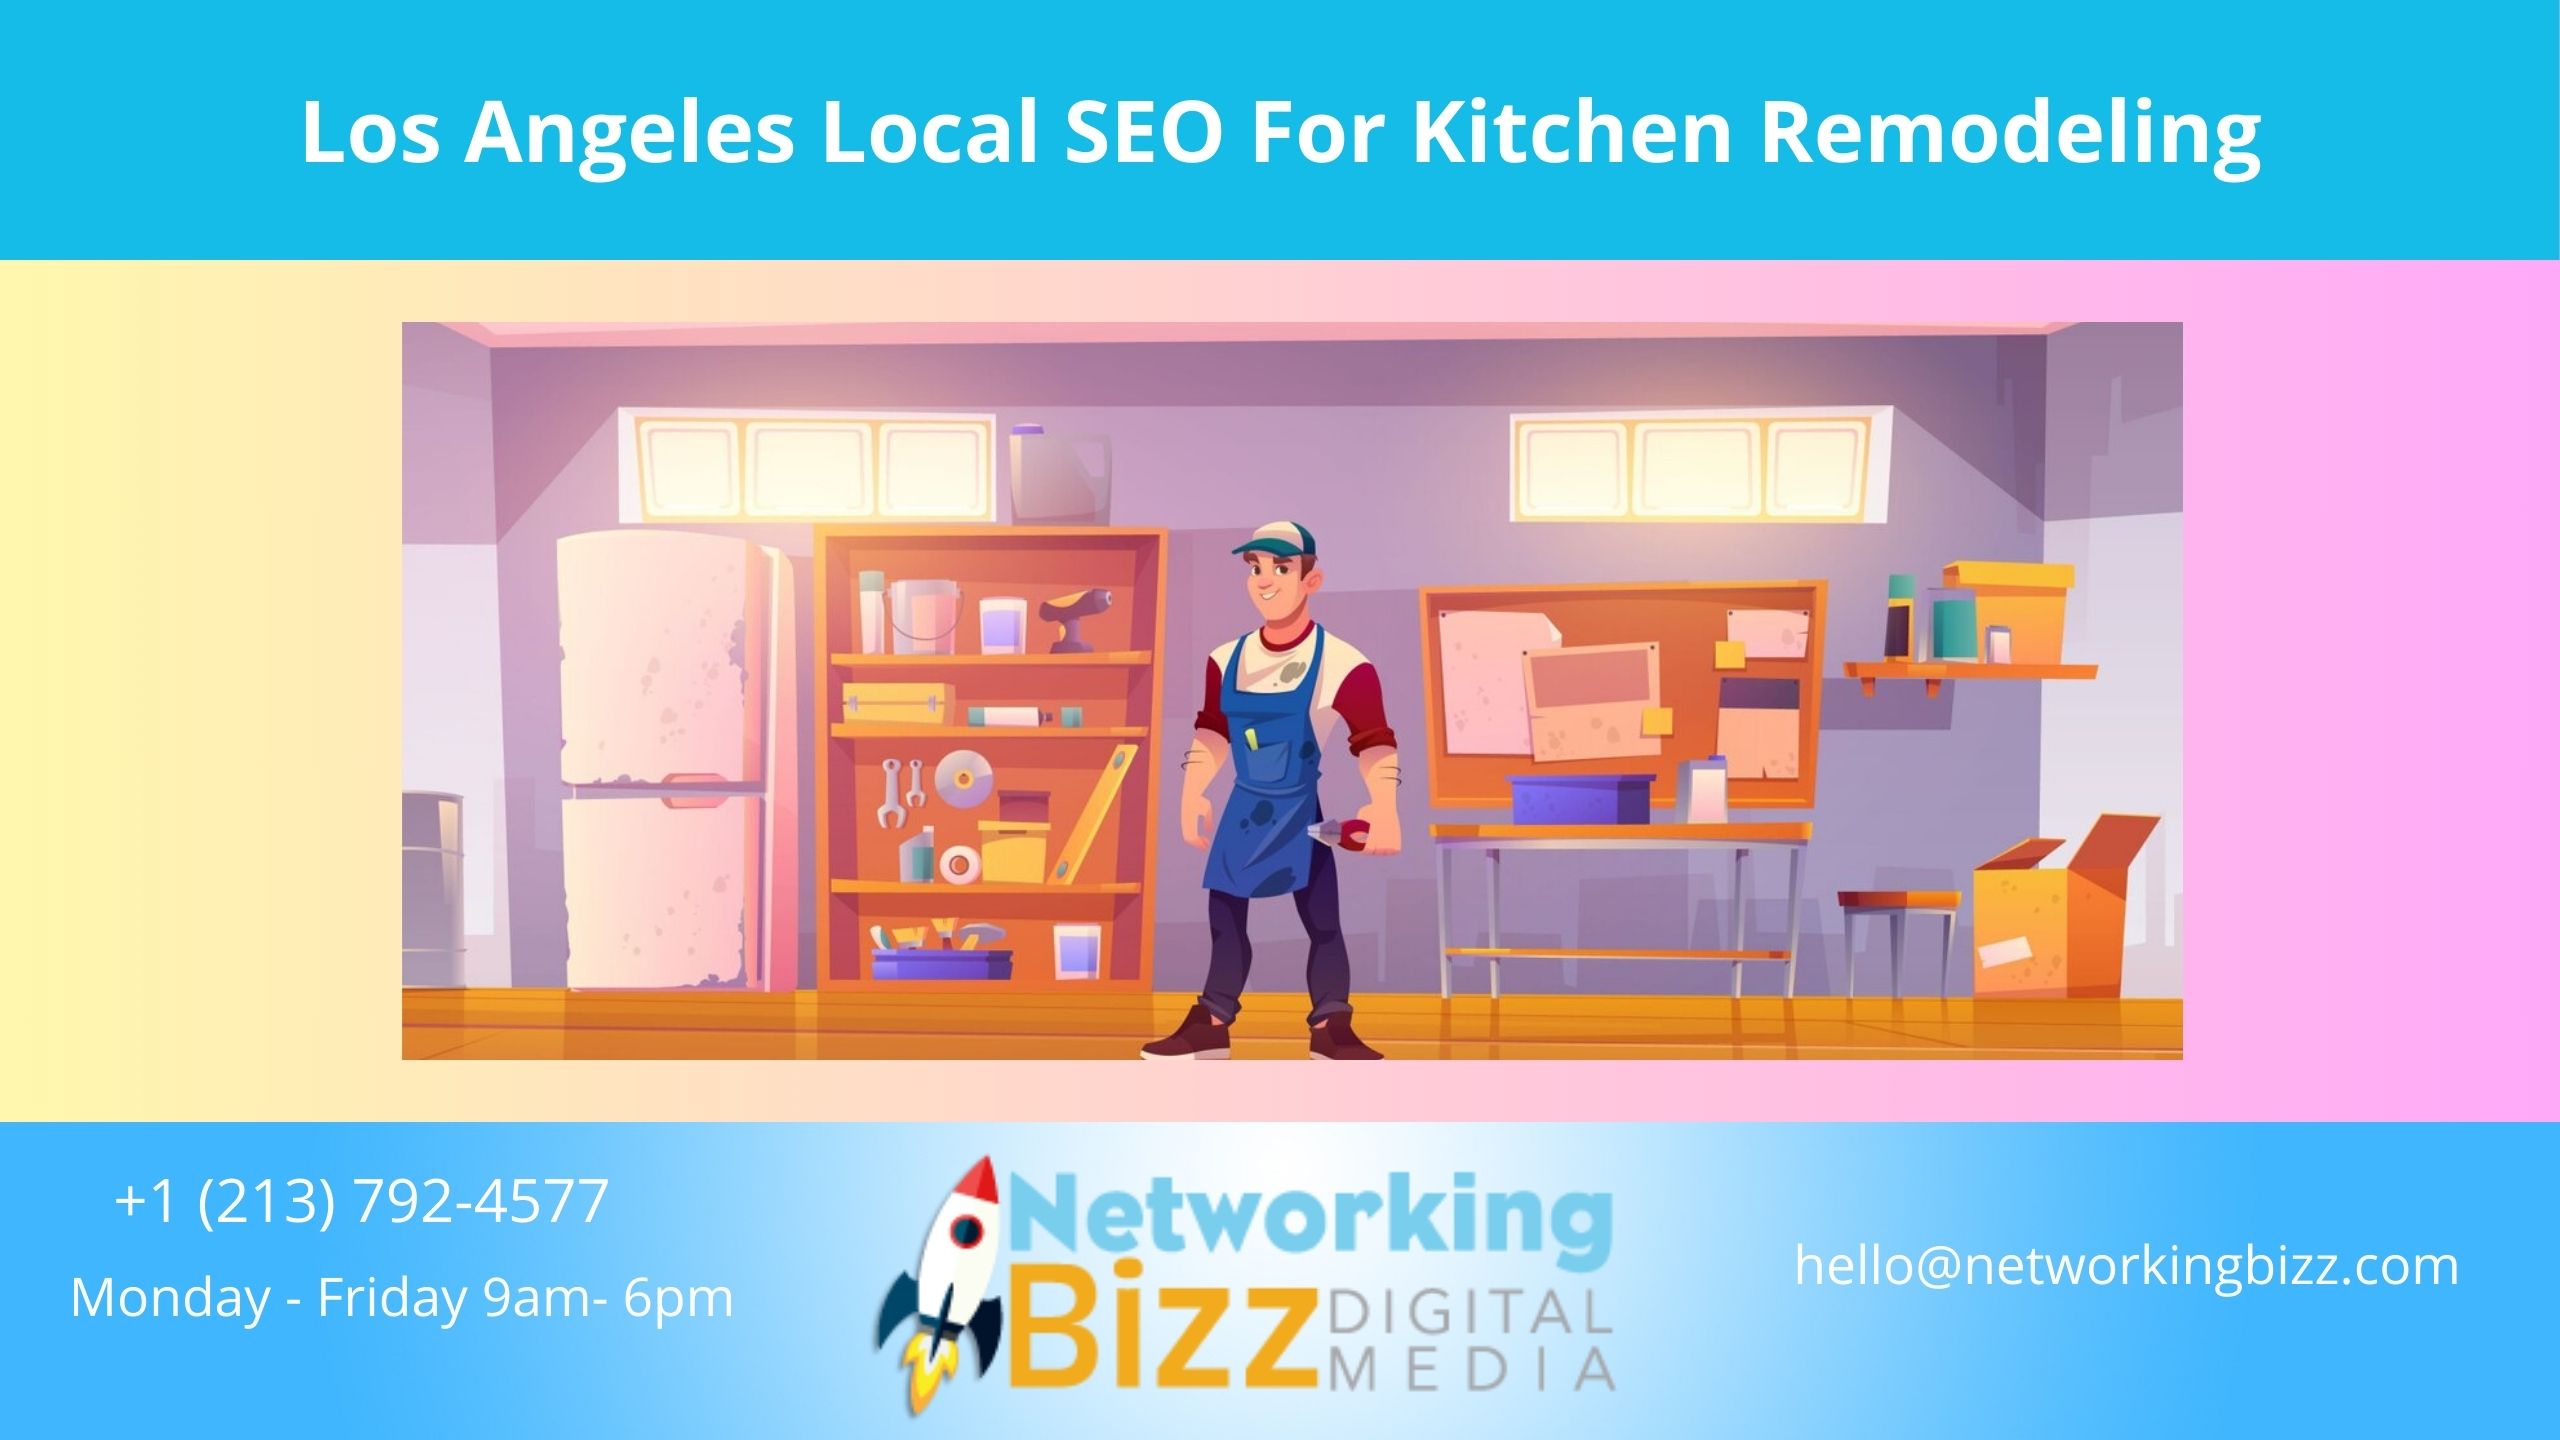 Los Angeles Local SEO For Kitchen Remodeling